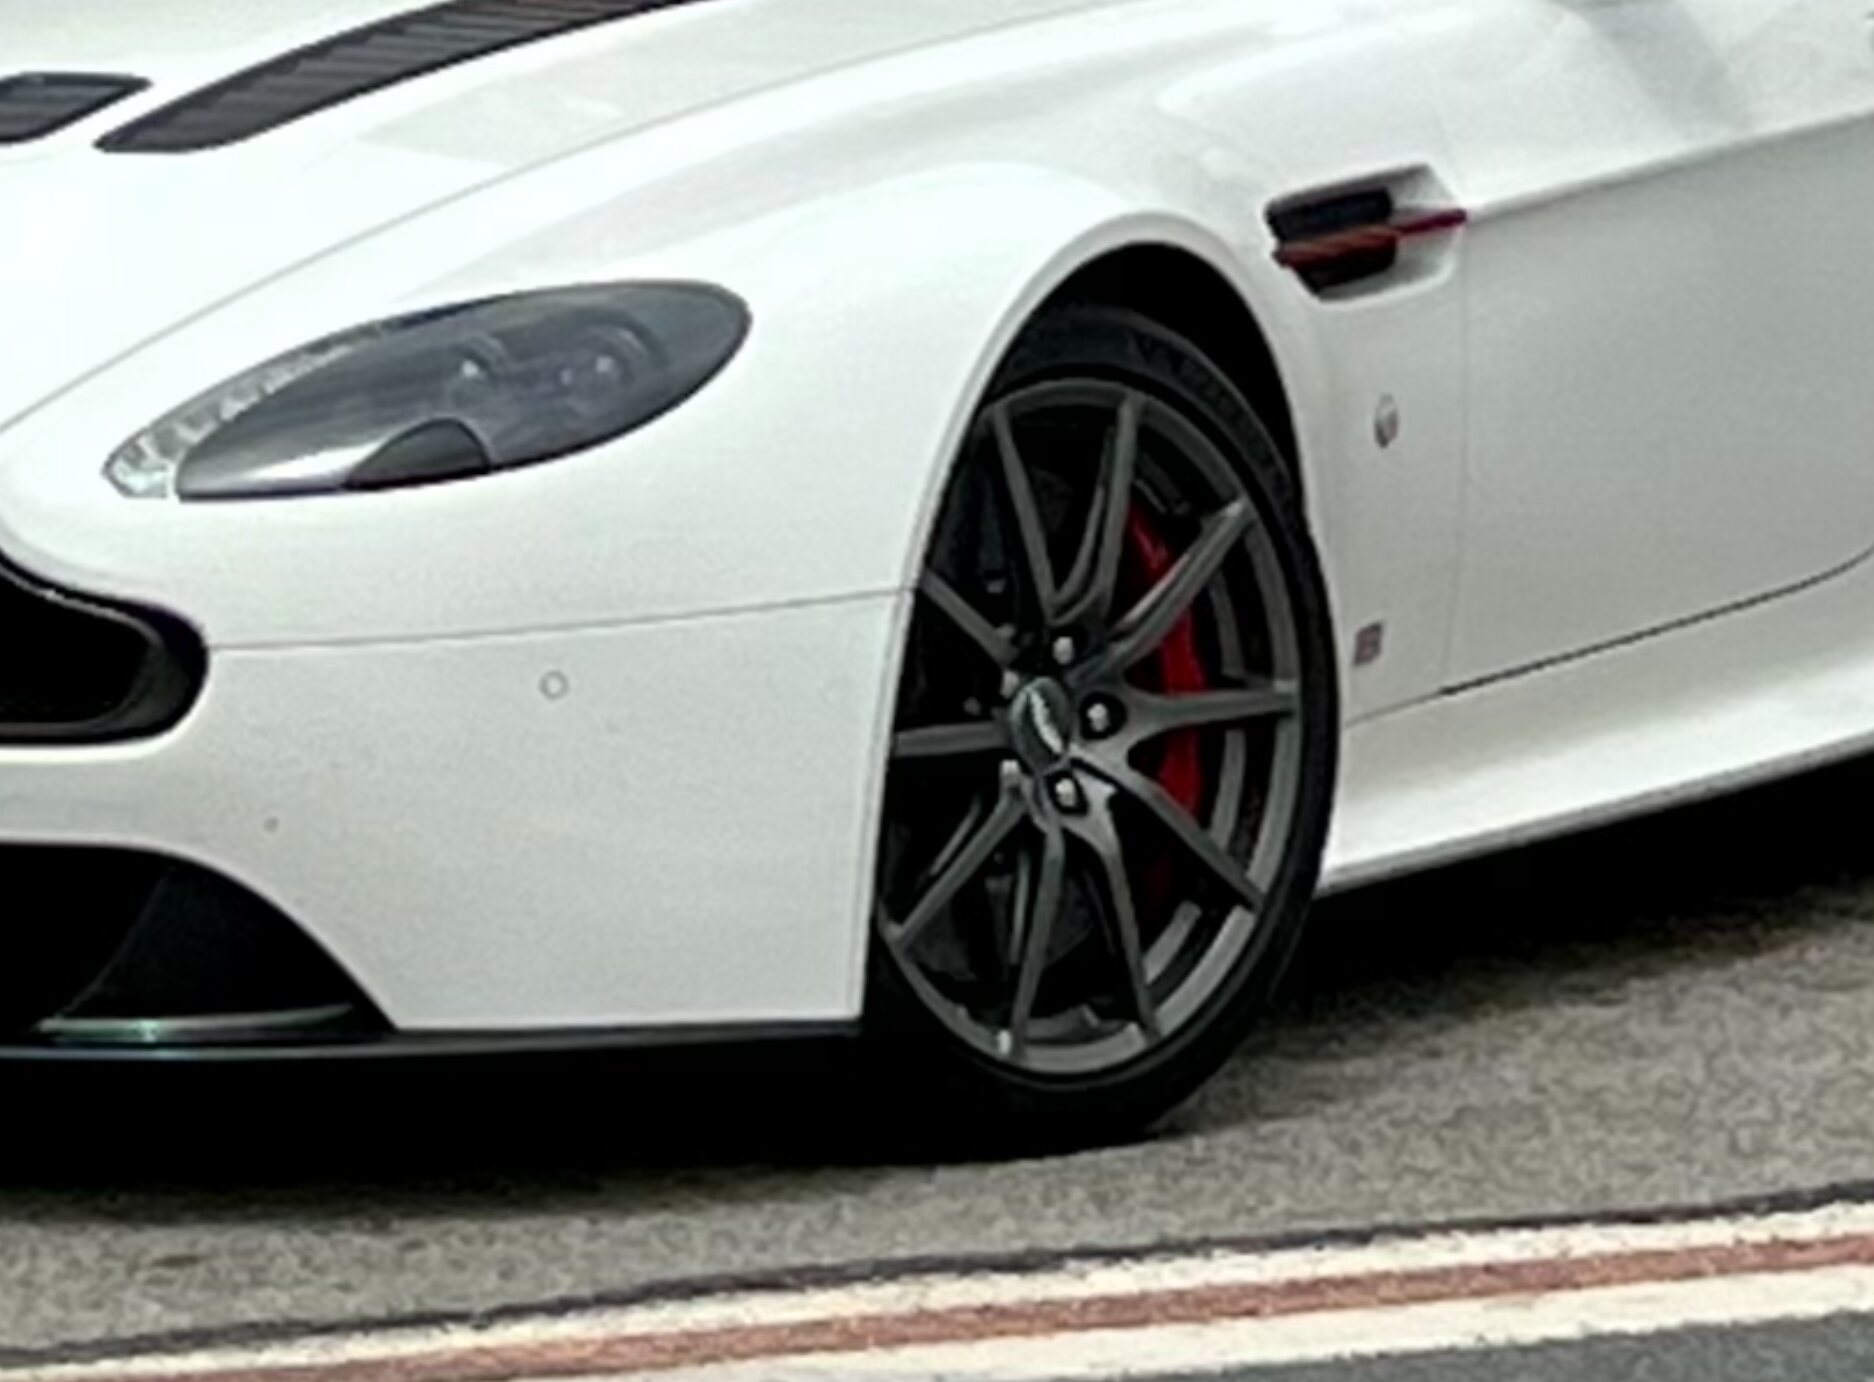 So what have you done with your Aston today? (Vol. 2) - Page 167 - Aston Martin - PistonHeads UK